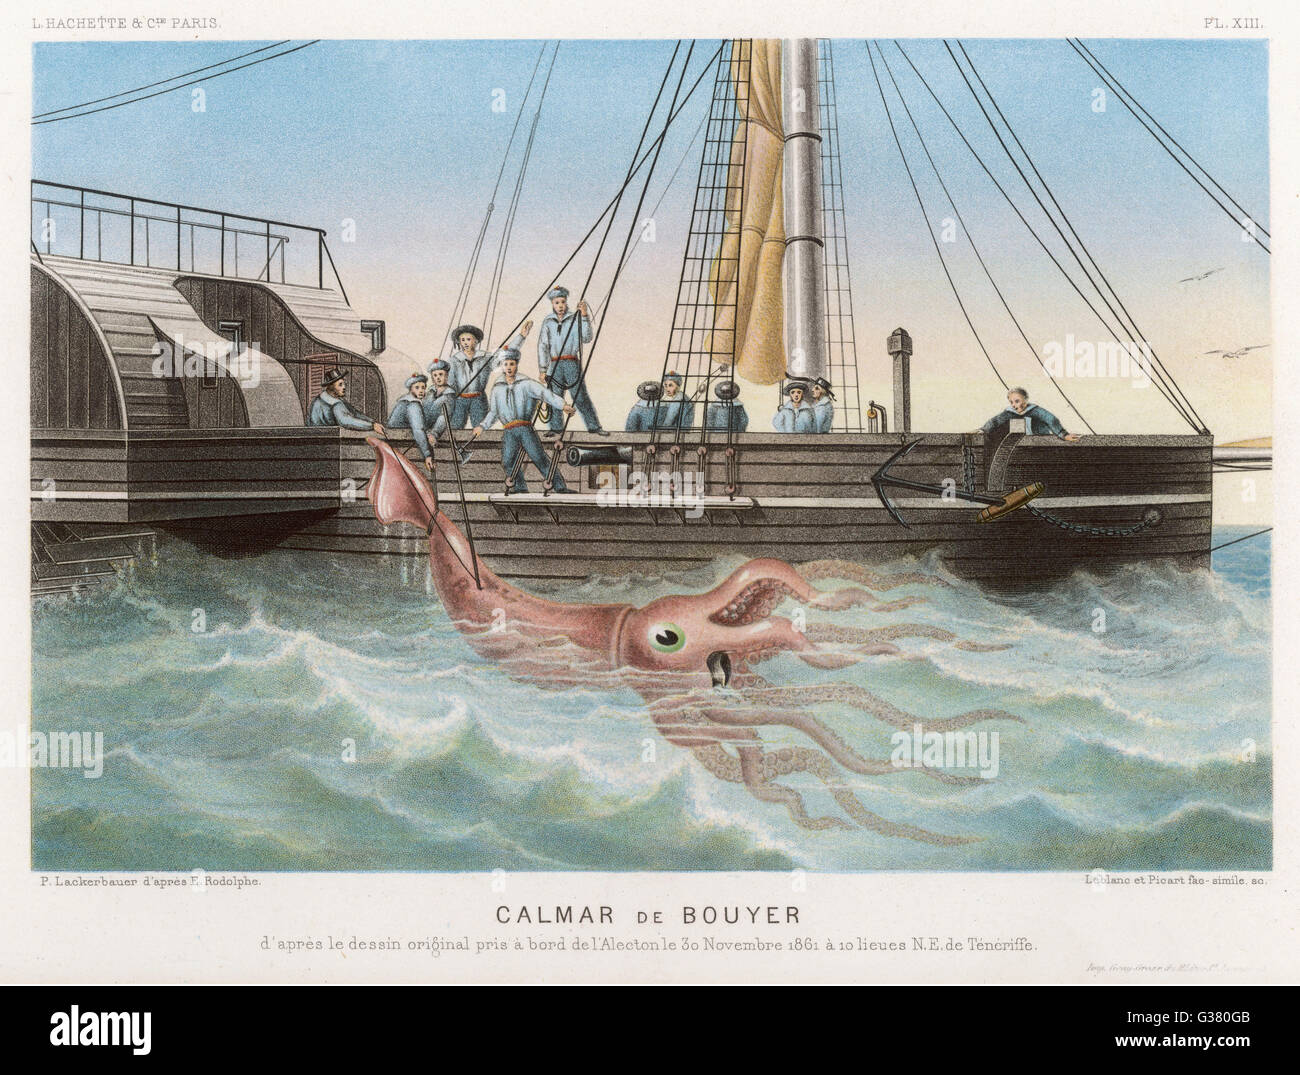 'Calmar de Bouyer', giant  squid caught by the French  vessel 'Alecto' off Tenerife,  Canary Islands       Date: 30 November 1861 Stock Photo